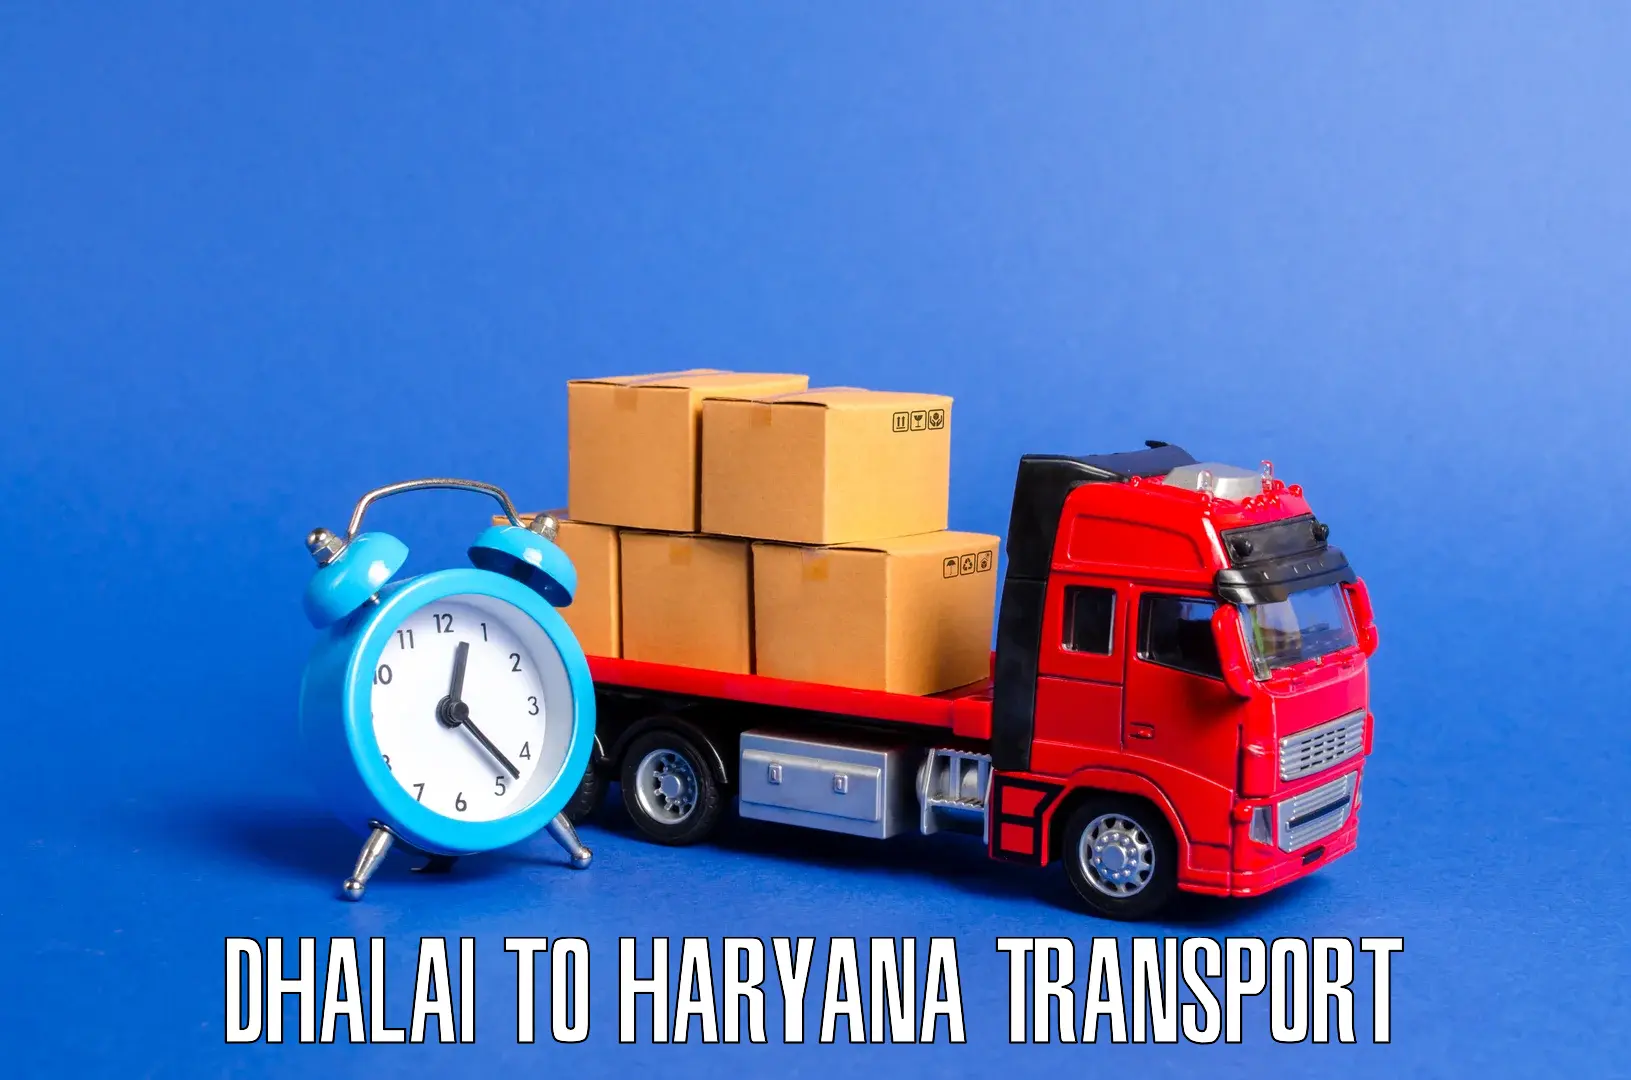 Goods delivery service Dhalai to Gurugram